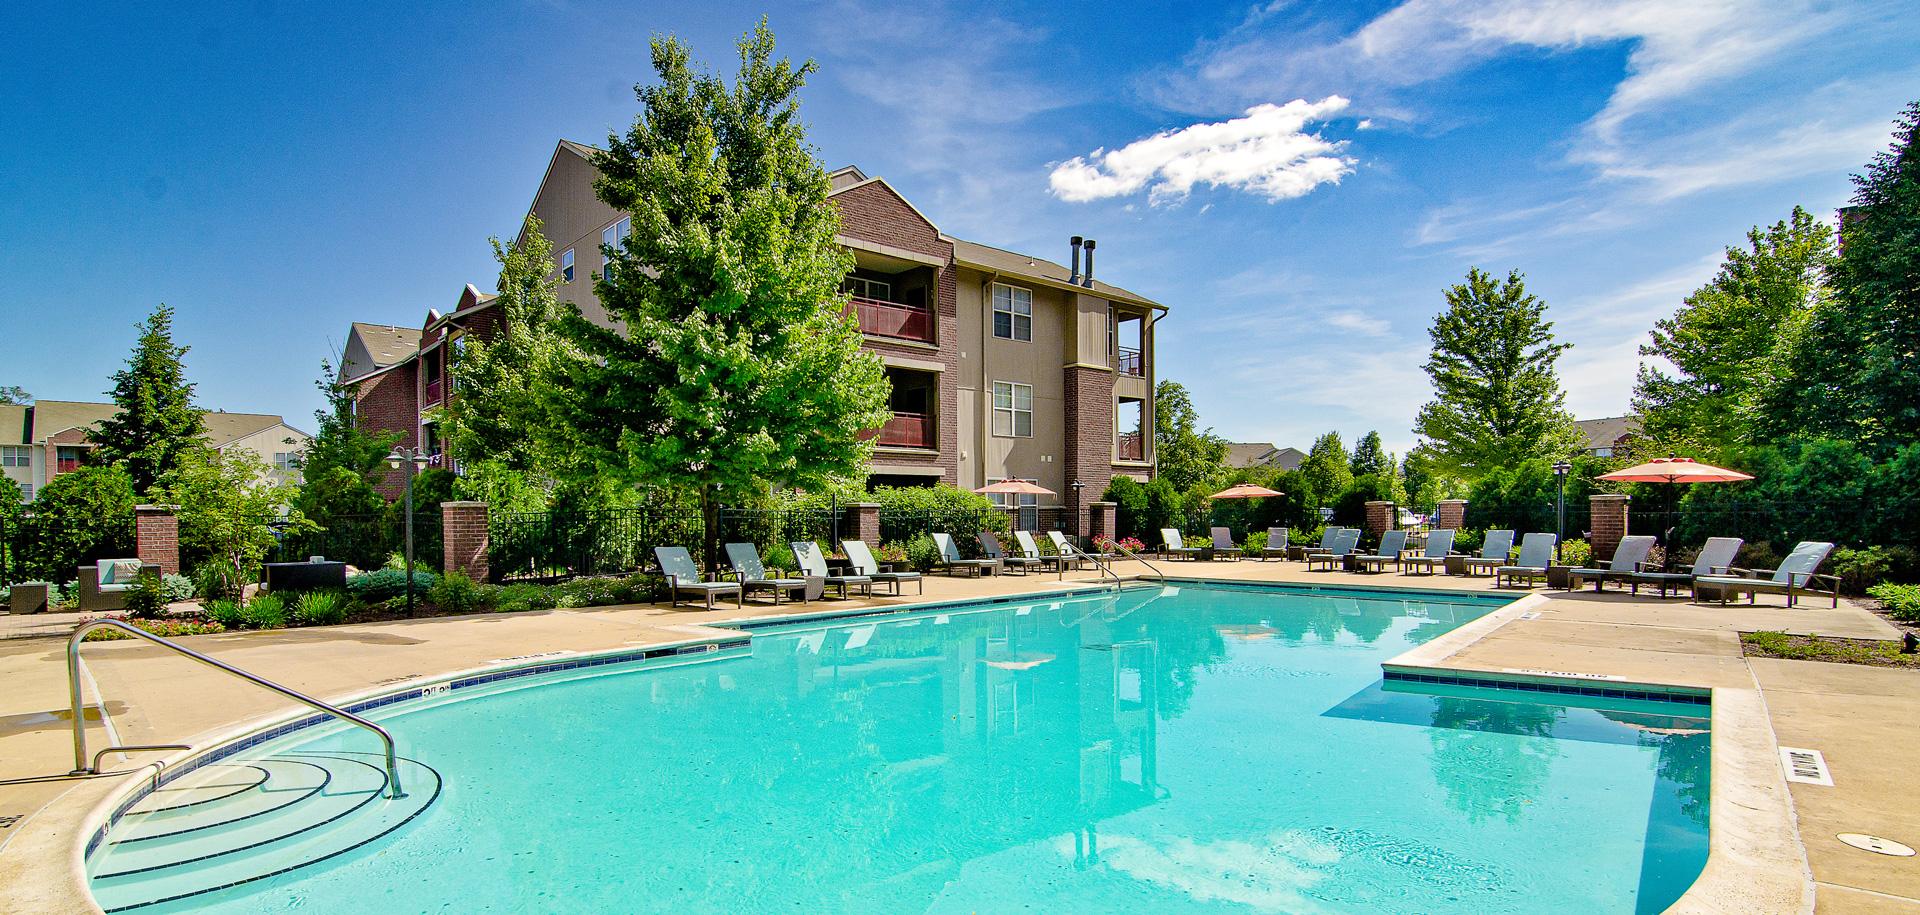 Image of pool side townhouse at Ovaltine Court